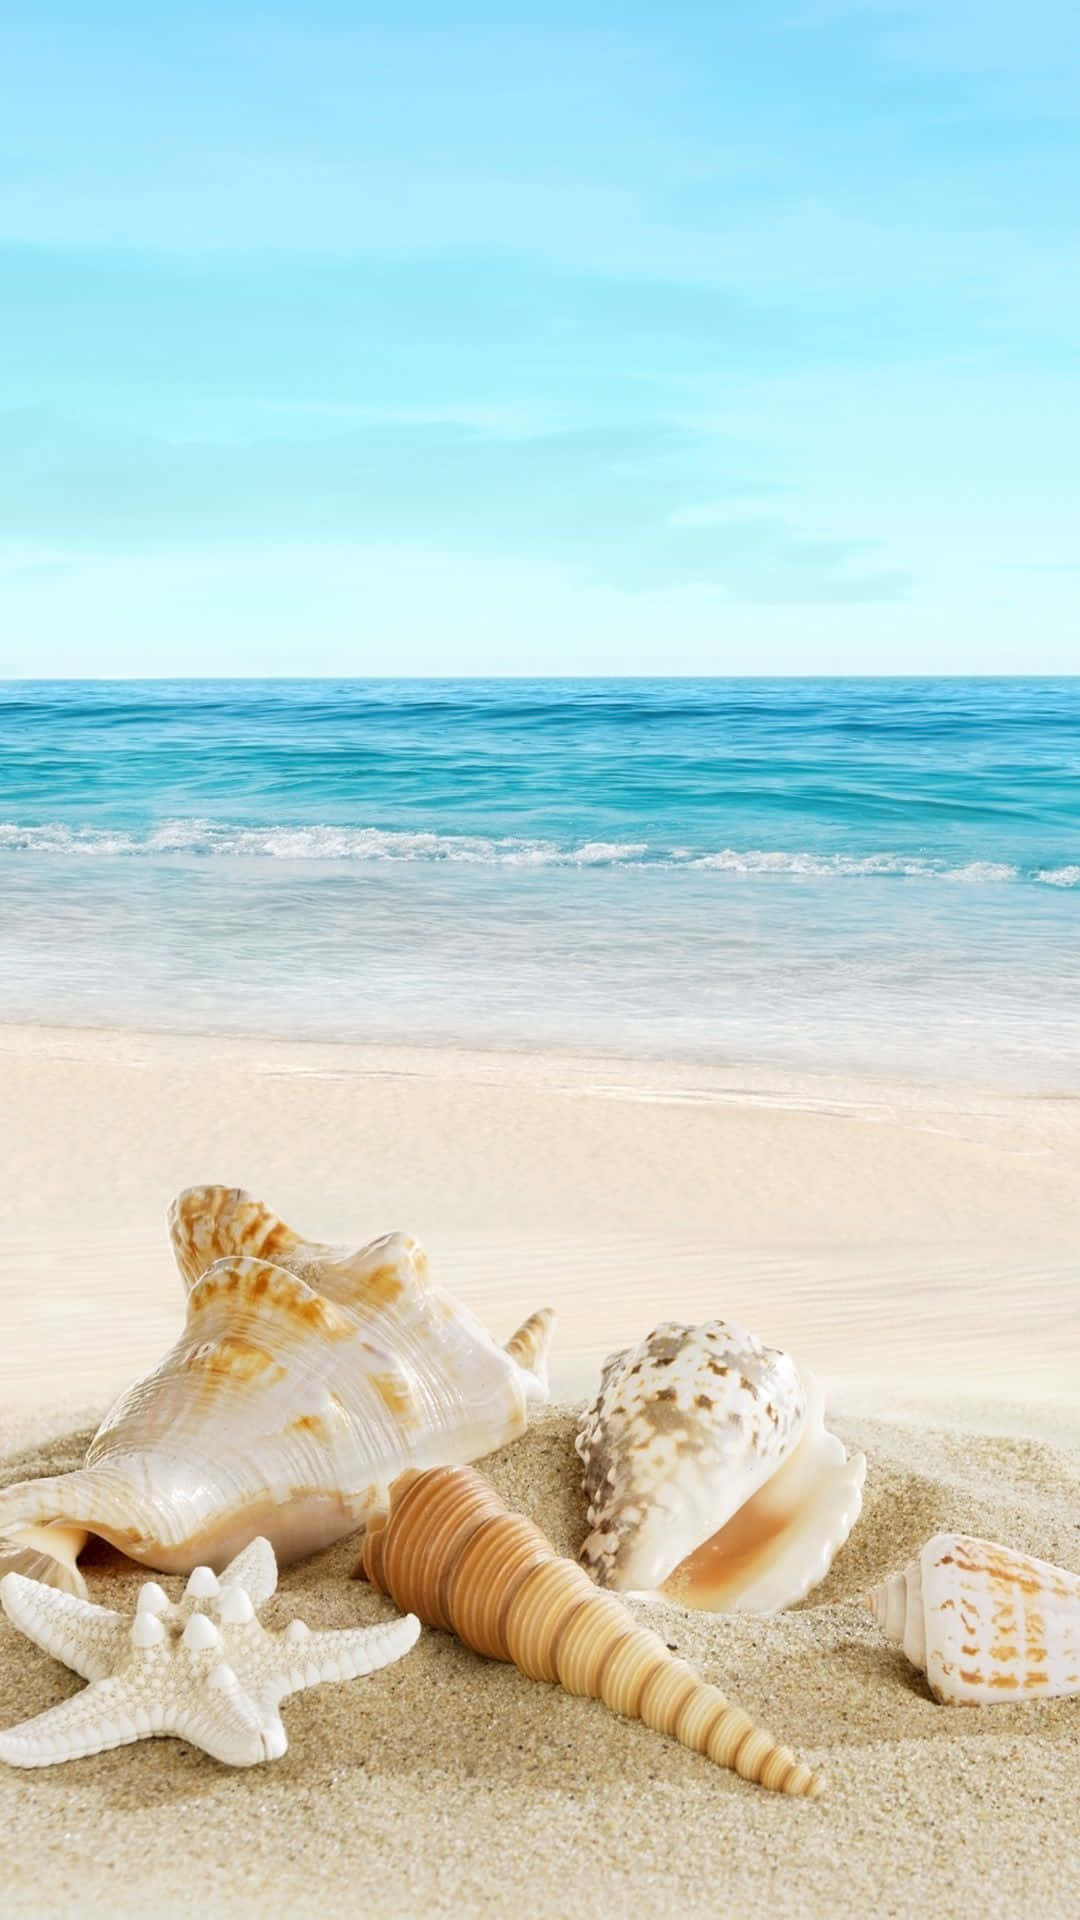 Enjoy crystal-clear waters and golden sandy beaches with your favorite iPhone. Wallpaper